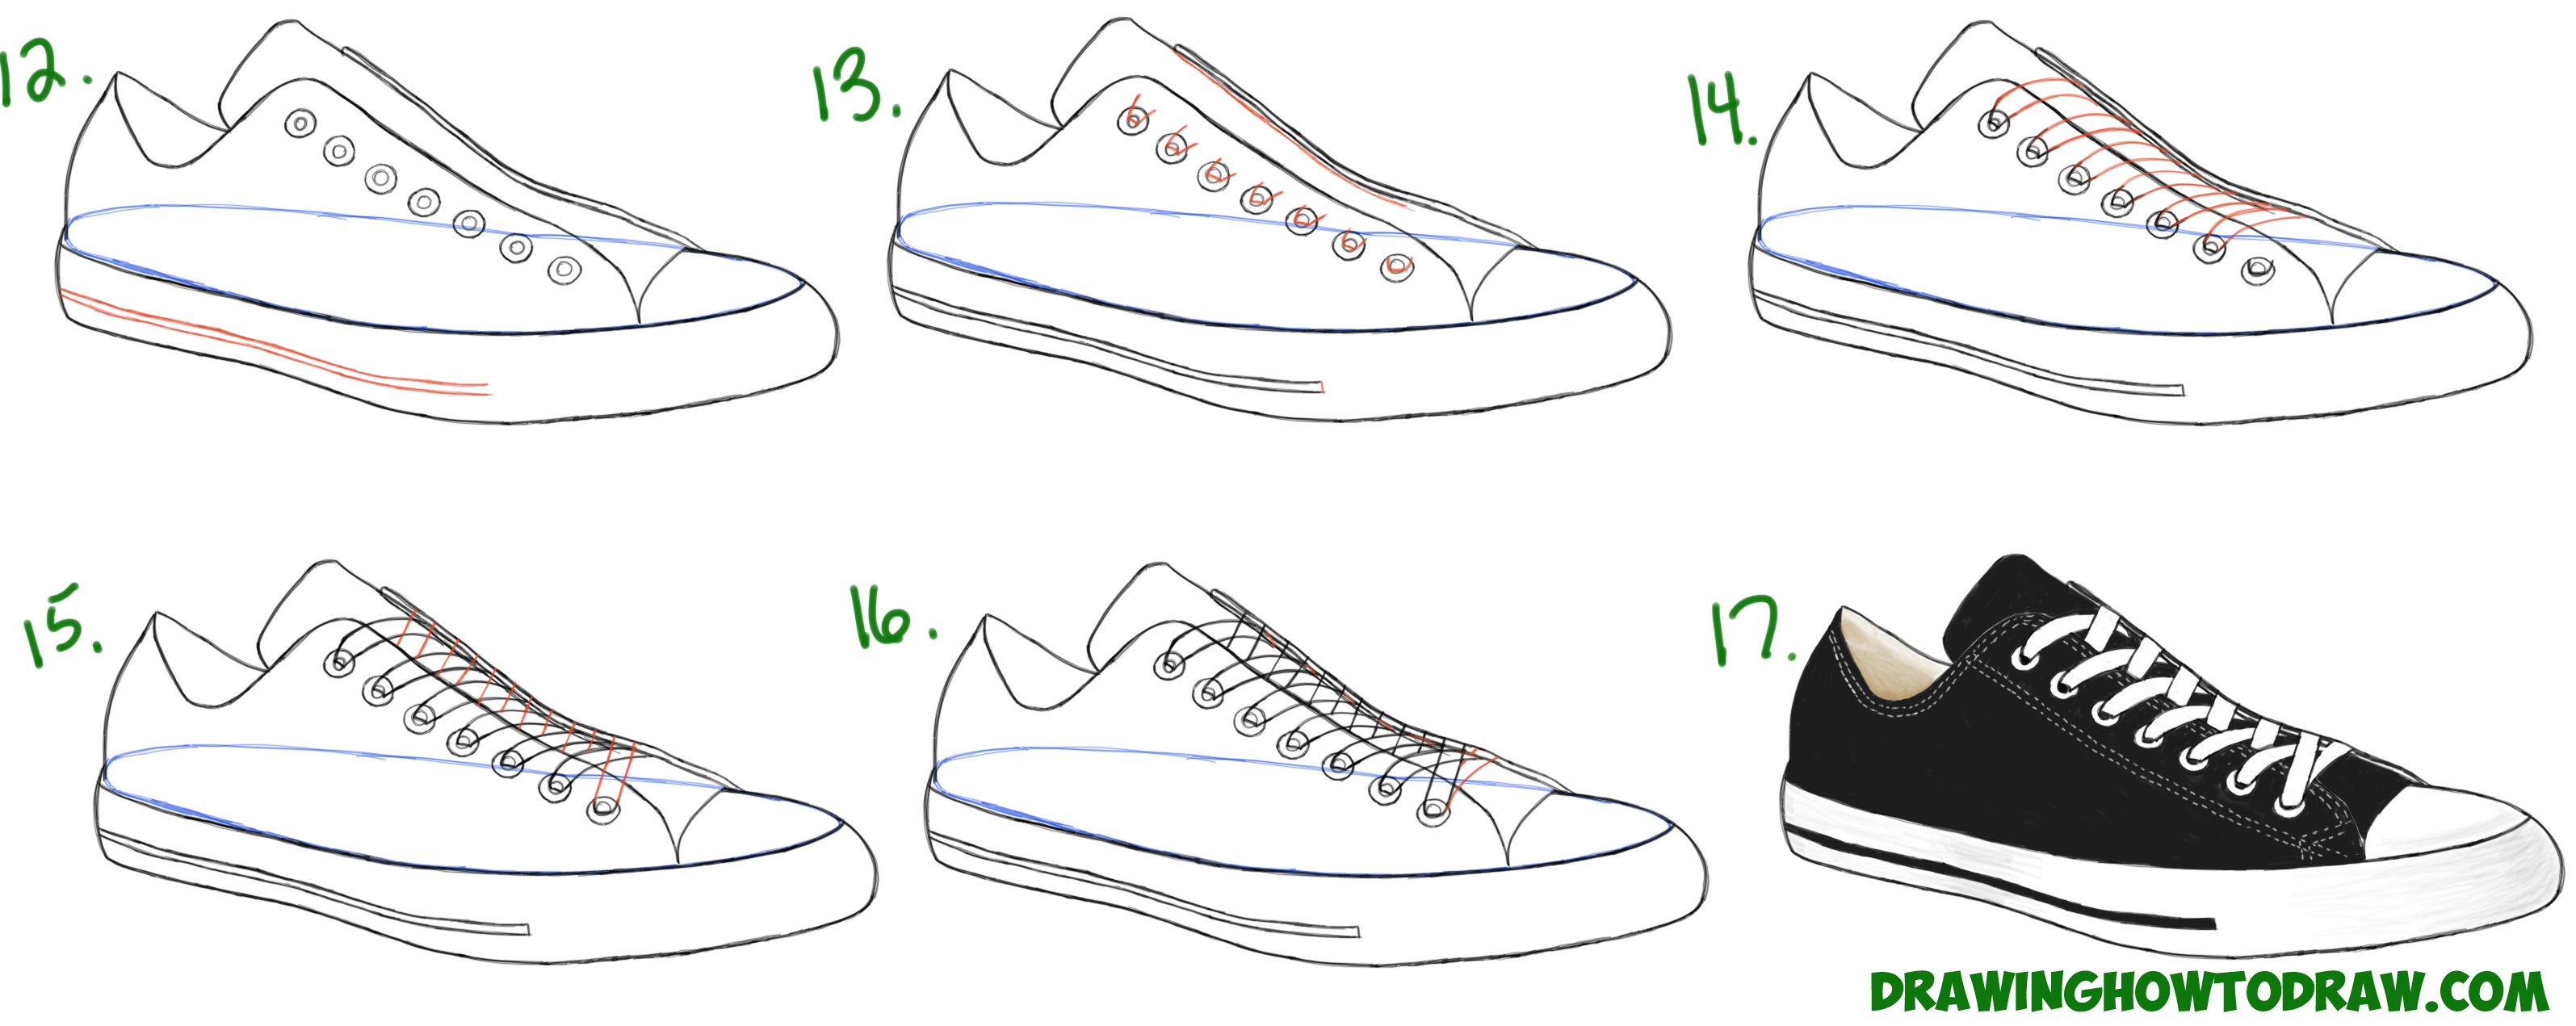 Coloring your shoe drawing (optional)